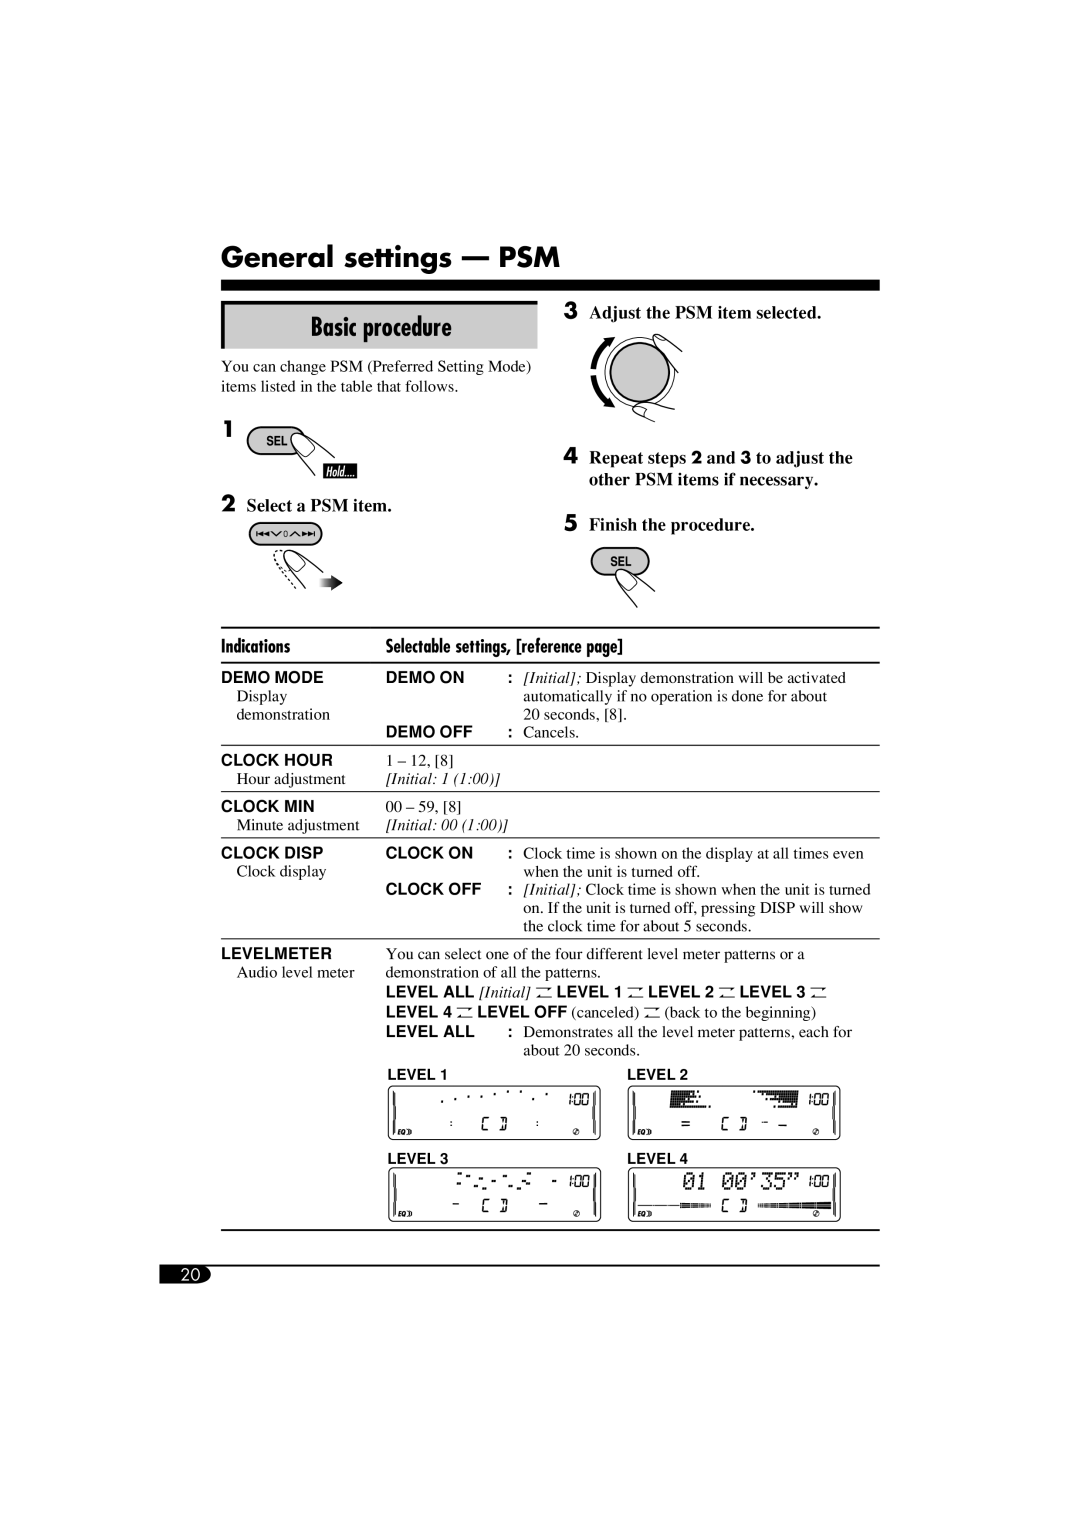 JVC KW-XC405, W-XC406 manual General settings - PSM, Basic procedure, 3Adjust the PSM item selected, Indications 